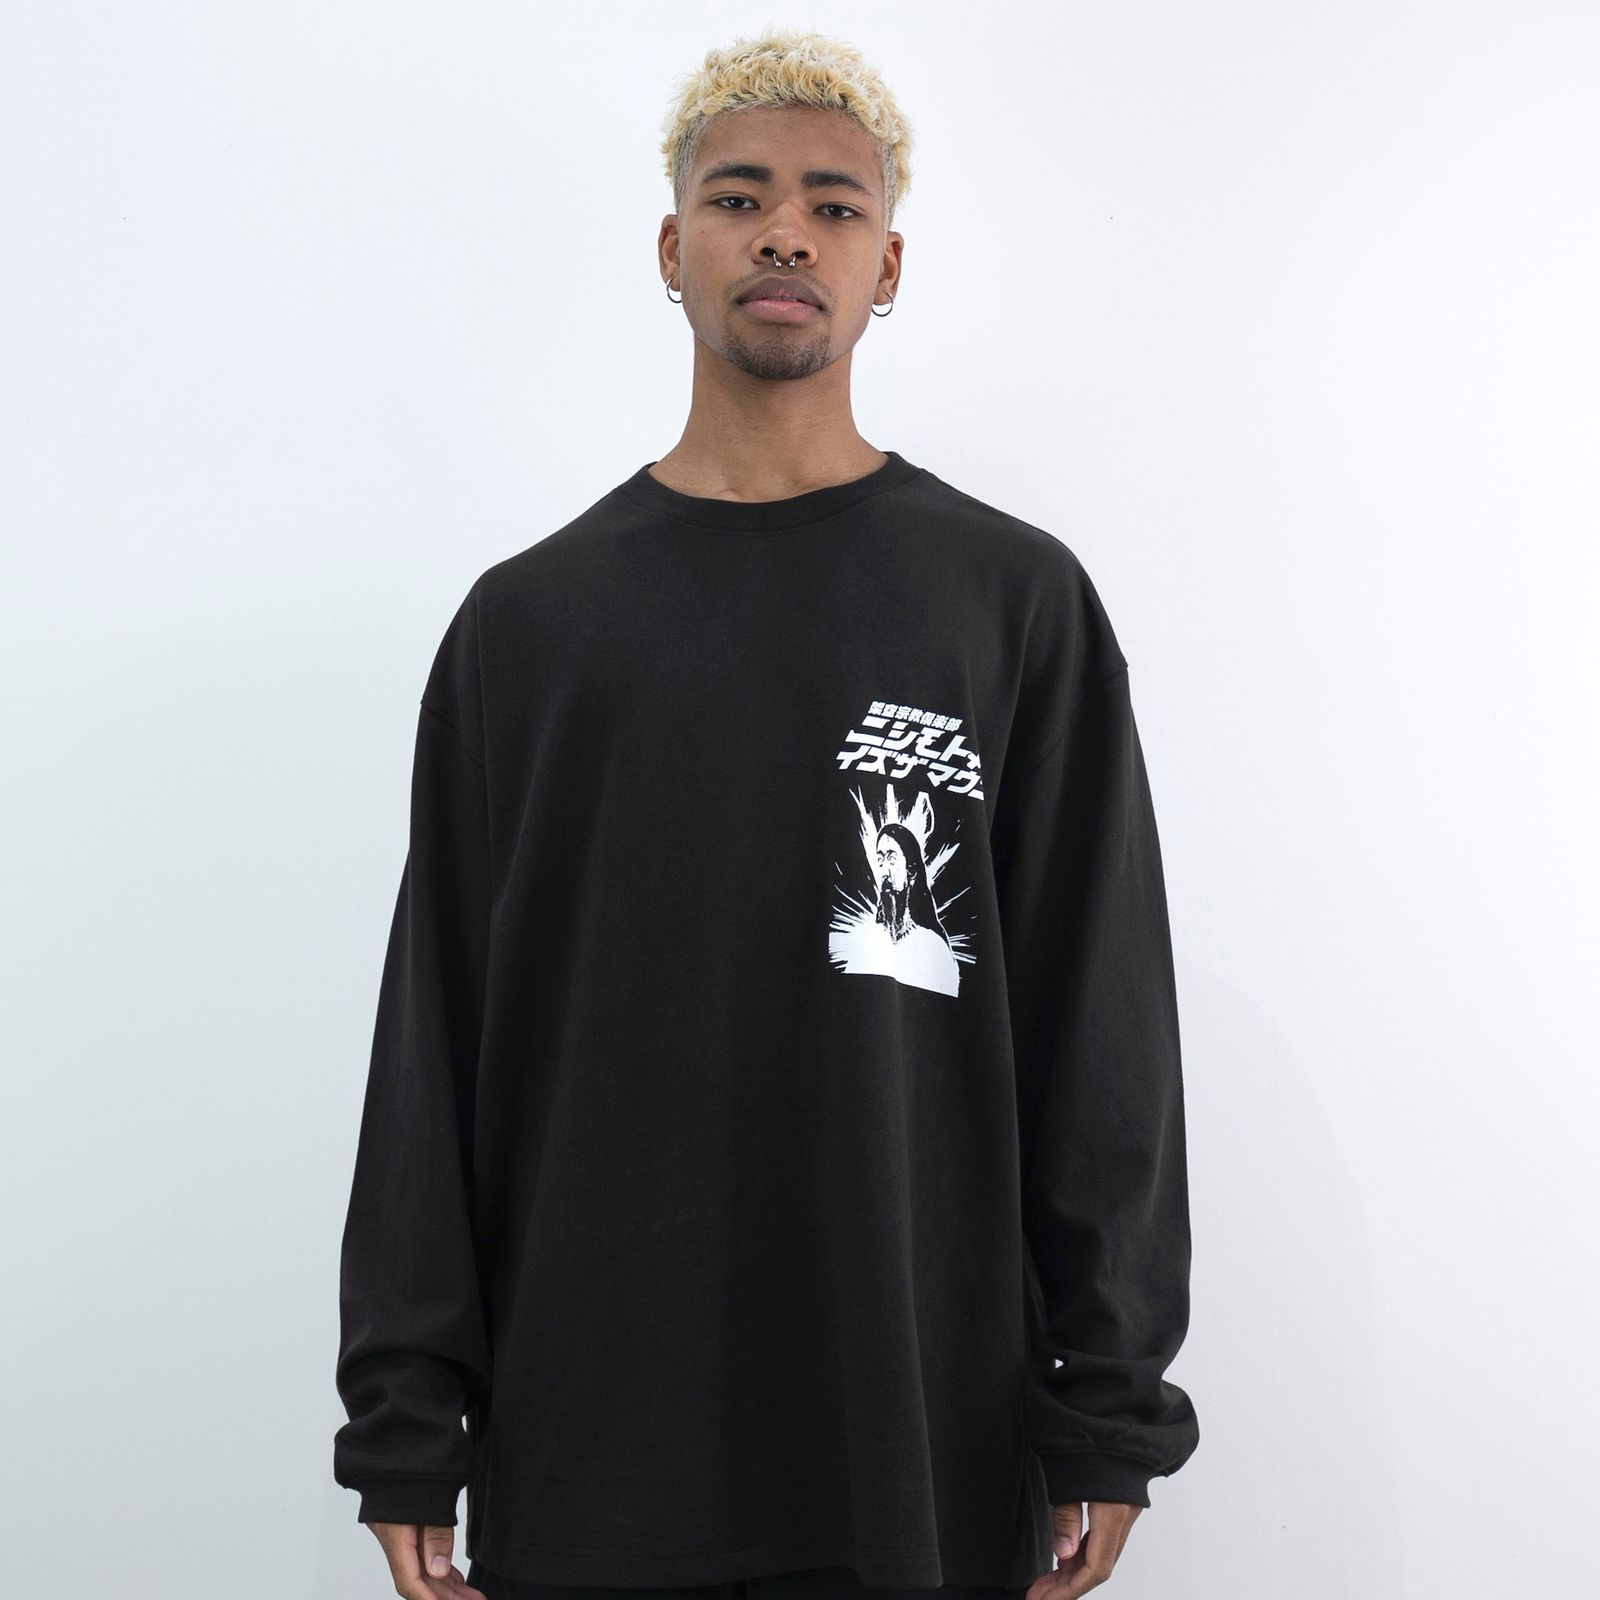 NISHIMOTO IS THE MOUTH - 【残りわずか】Comic L/S Tee | ACRMTSM 